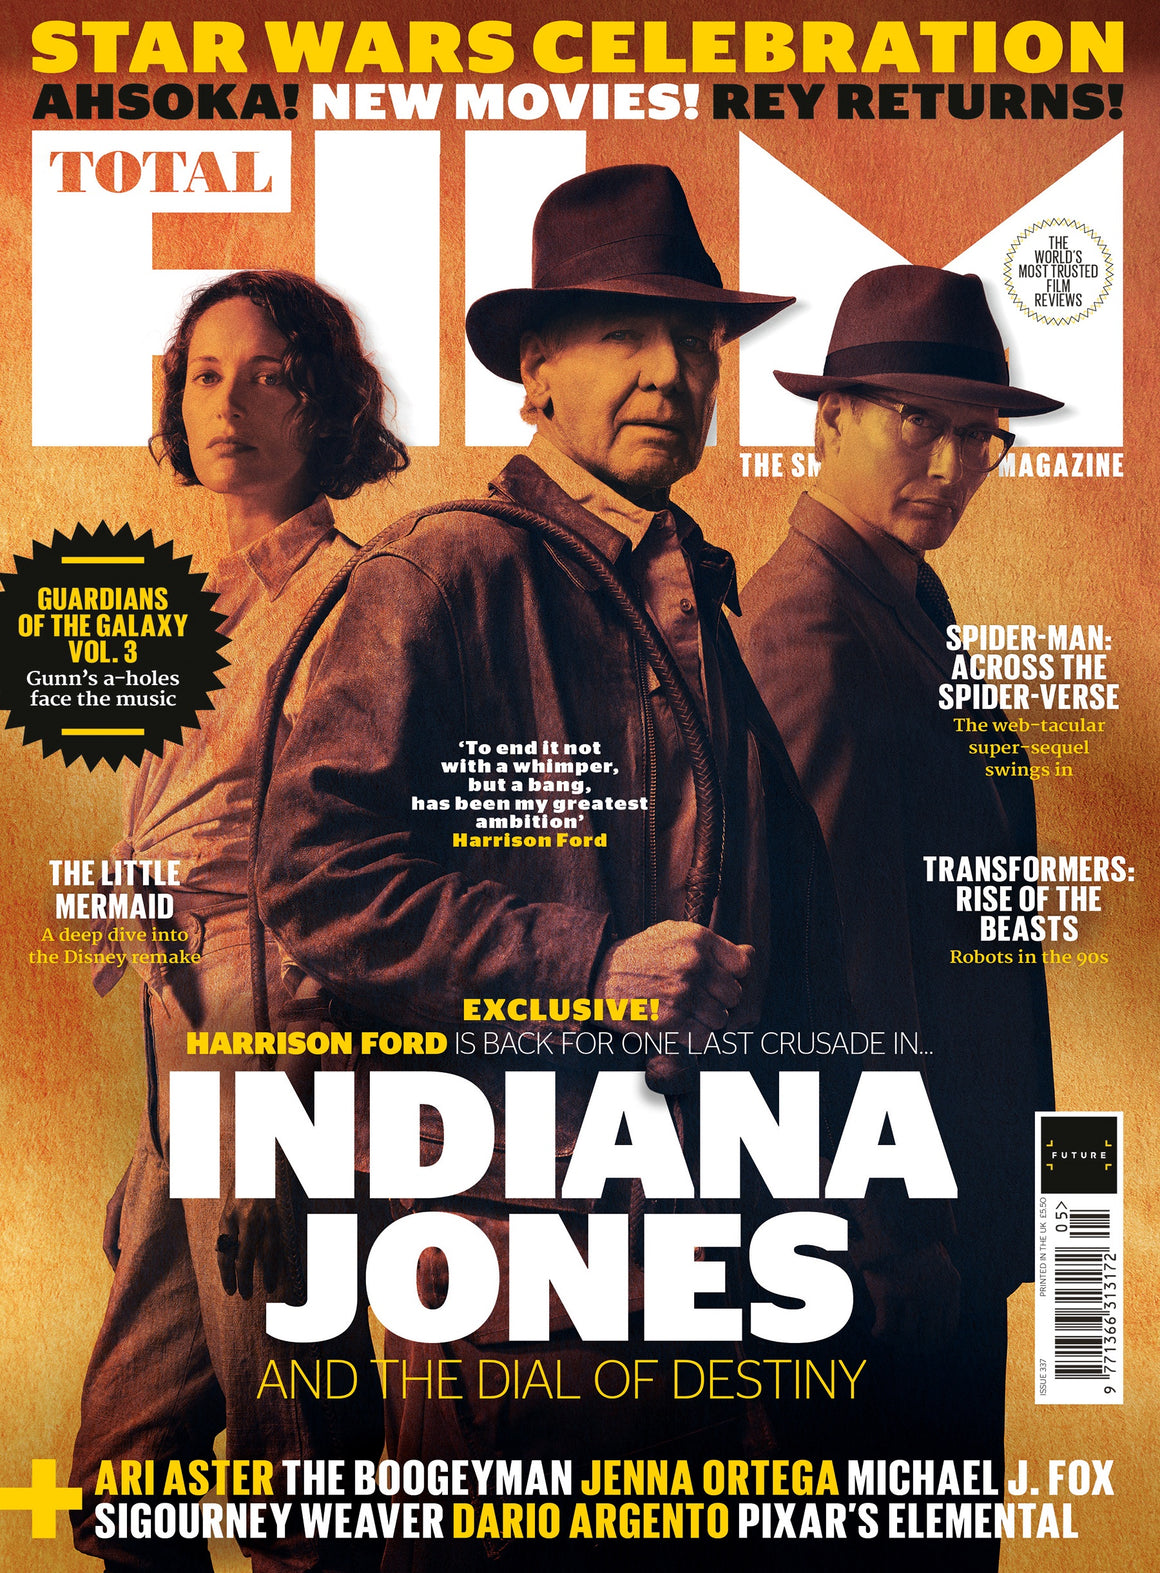 TOTAL FILM Magazine #337 Indiana Jones and the Dial of Destiny Mads Mikkelsen